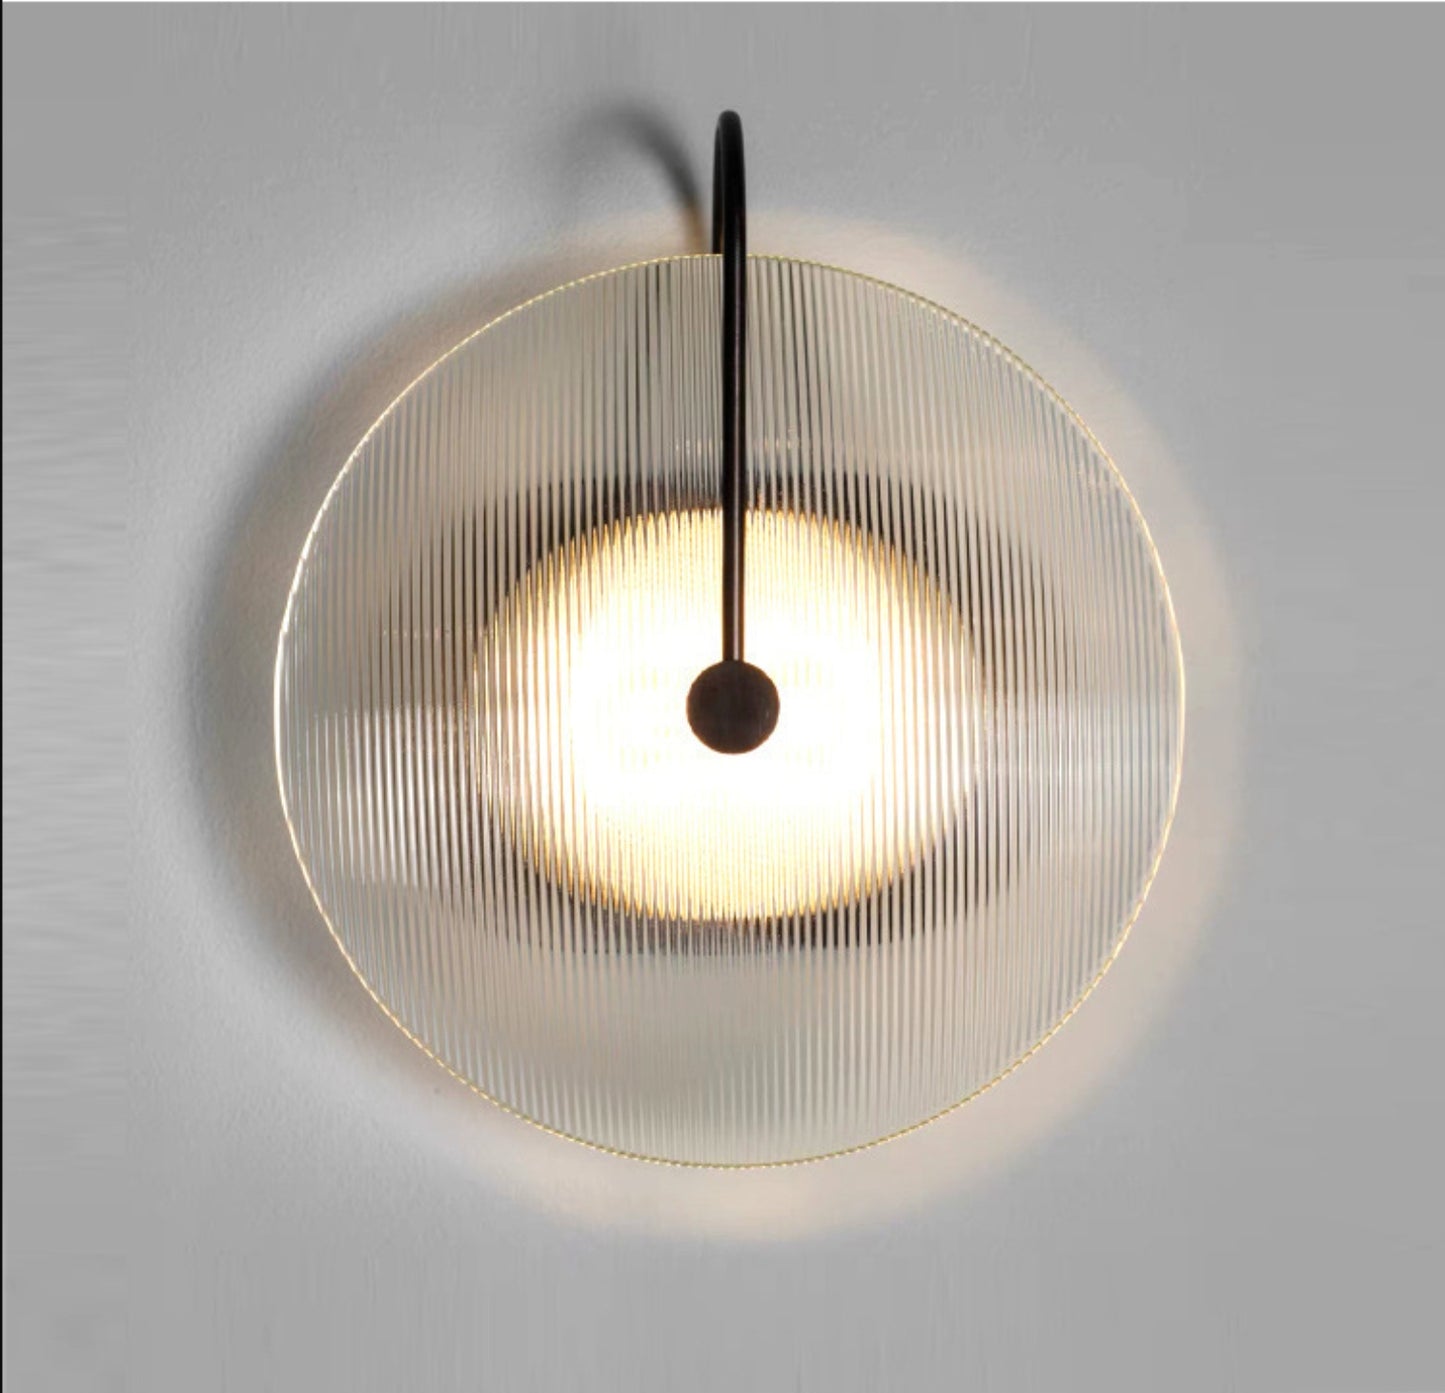 Gold/Black Armed Wall Sconce Minimalist Prismatic Glass 1 Light Bell Shaped Wall Mounted Lamp